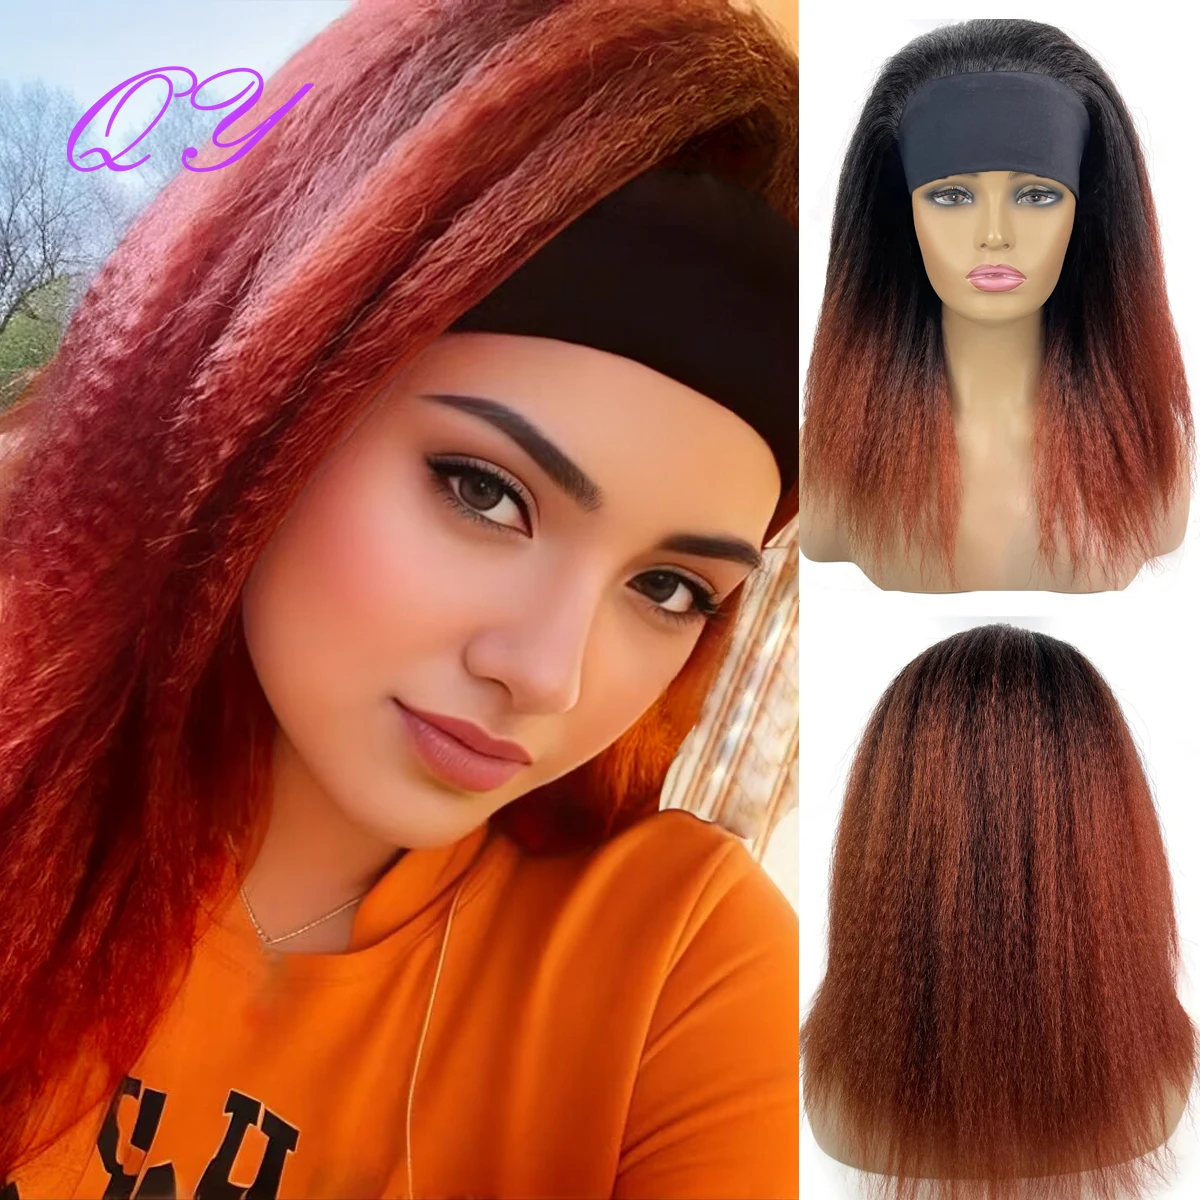 Synthetic Wigs for Women Headband Yaki Straight Black Ombre Orange Medium Length Free Part Hairstyle African Party Or Hair Wigs